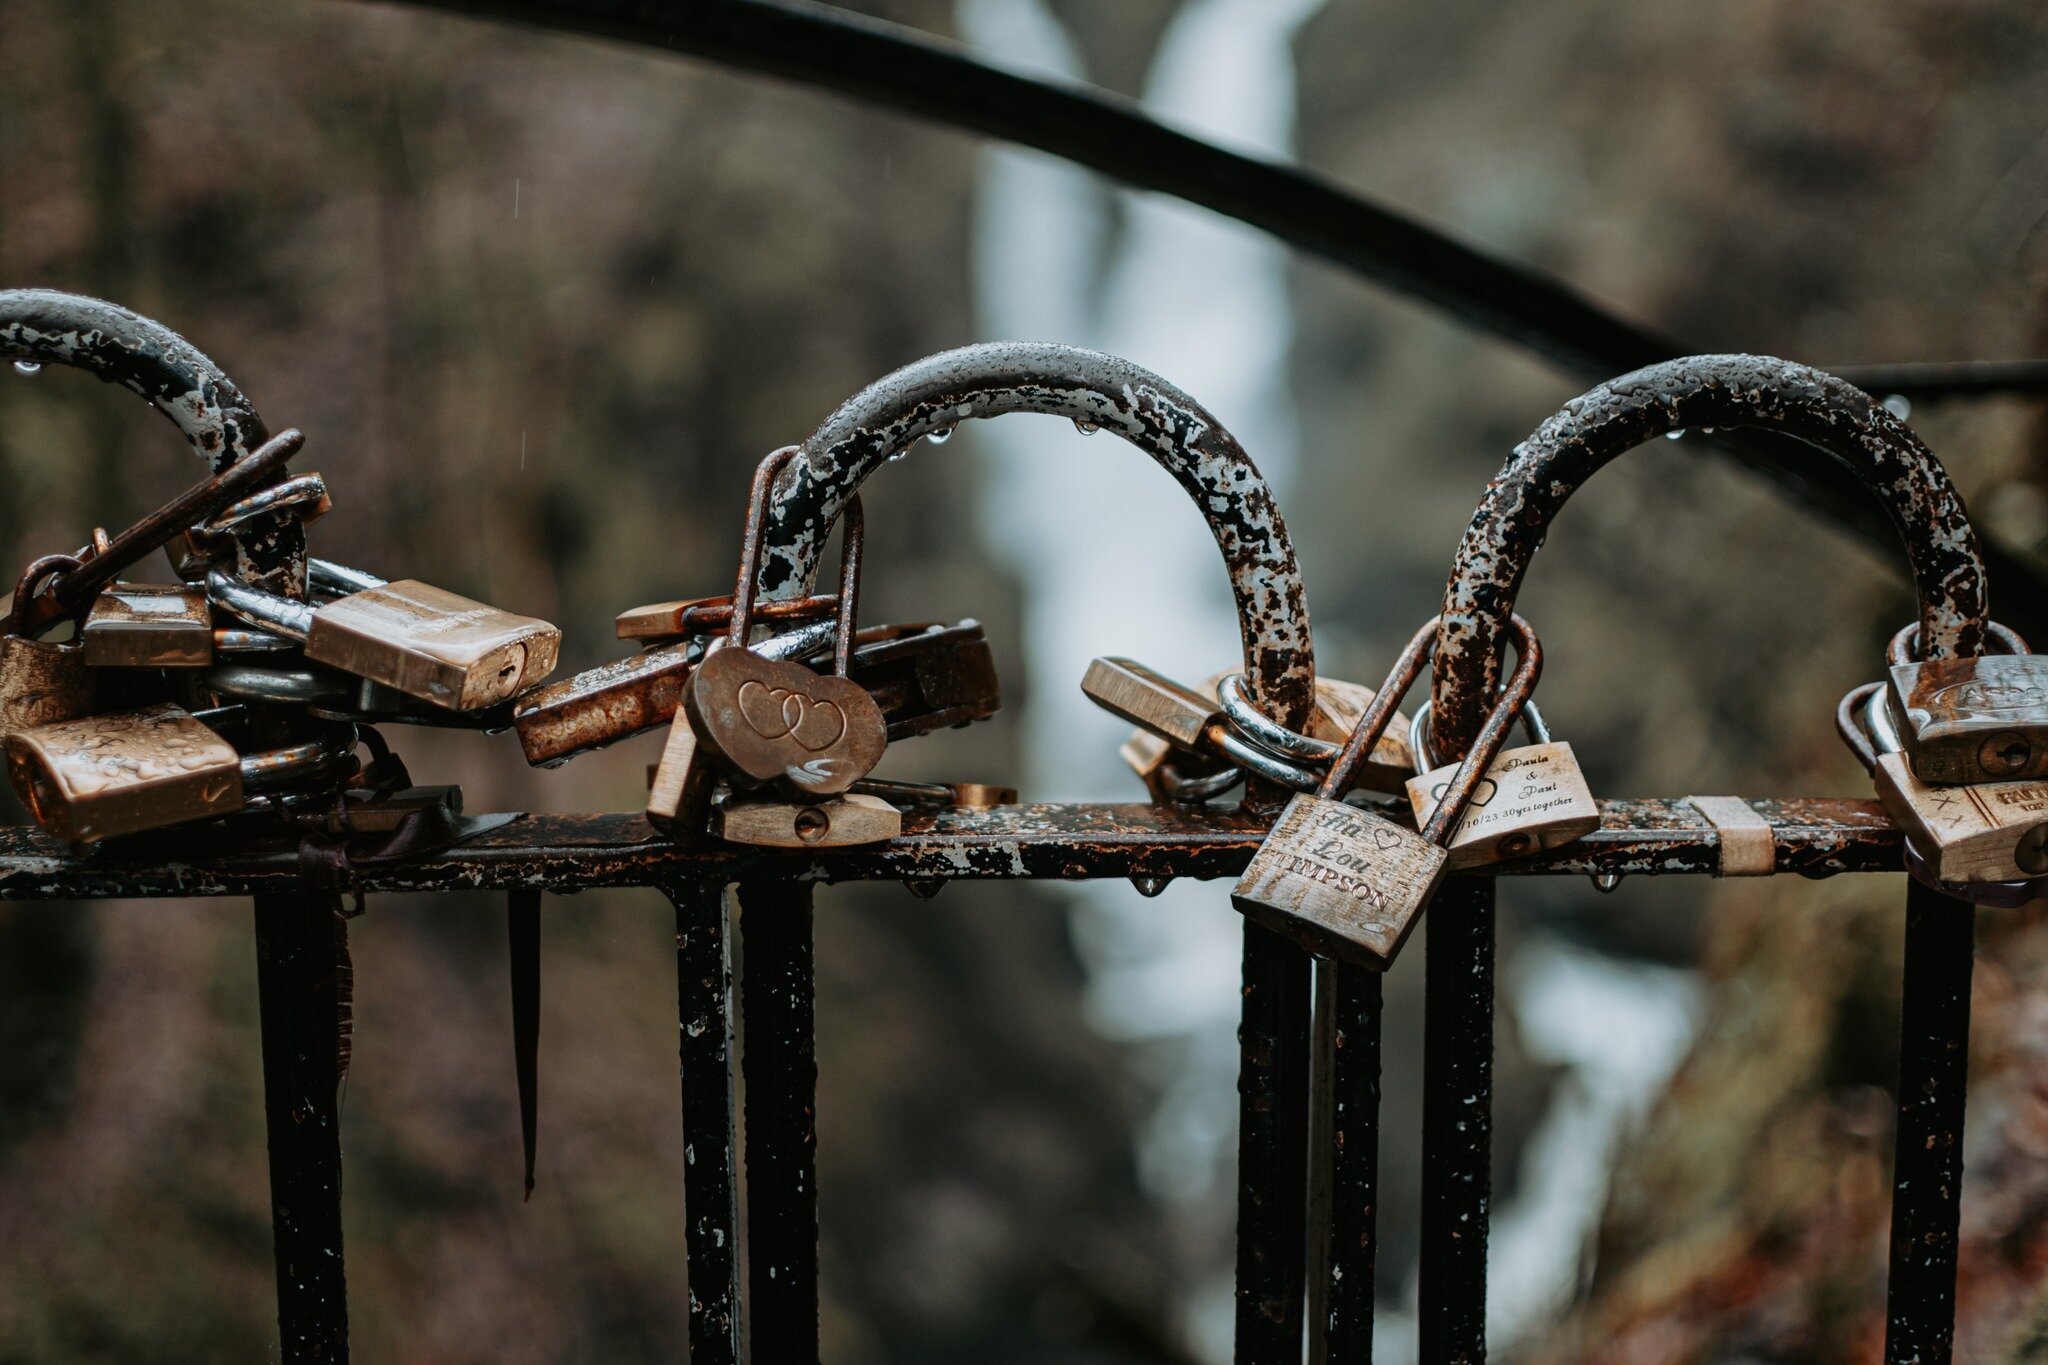 Being wedding photographers, our business is all about showcasing people's love and on a recent trip to Stock Gyhll Force, we couldn't not take a quick snap of these locks overlooking the waterfall ❤

 #northeastweddingsupplier #weddingphotographers 